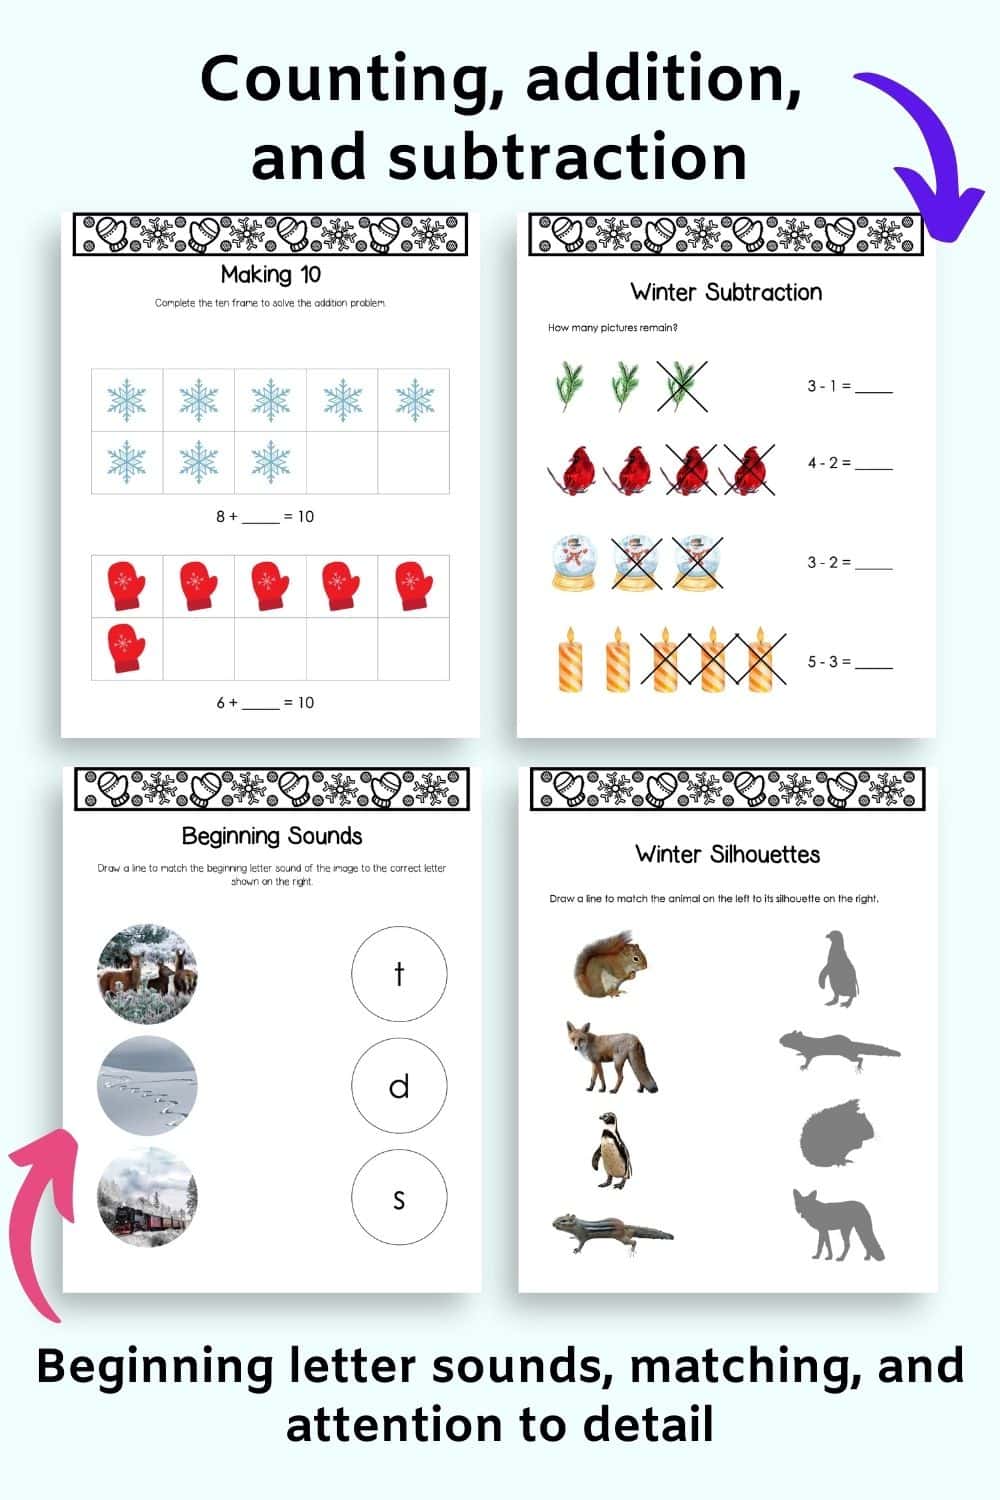 Text "counting, addition, and subtraction" and "beginning letter sounds, matching, and attention to detail" with a preview of four activity pages